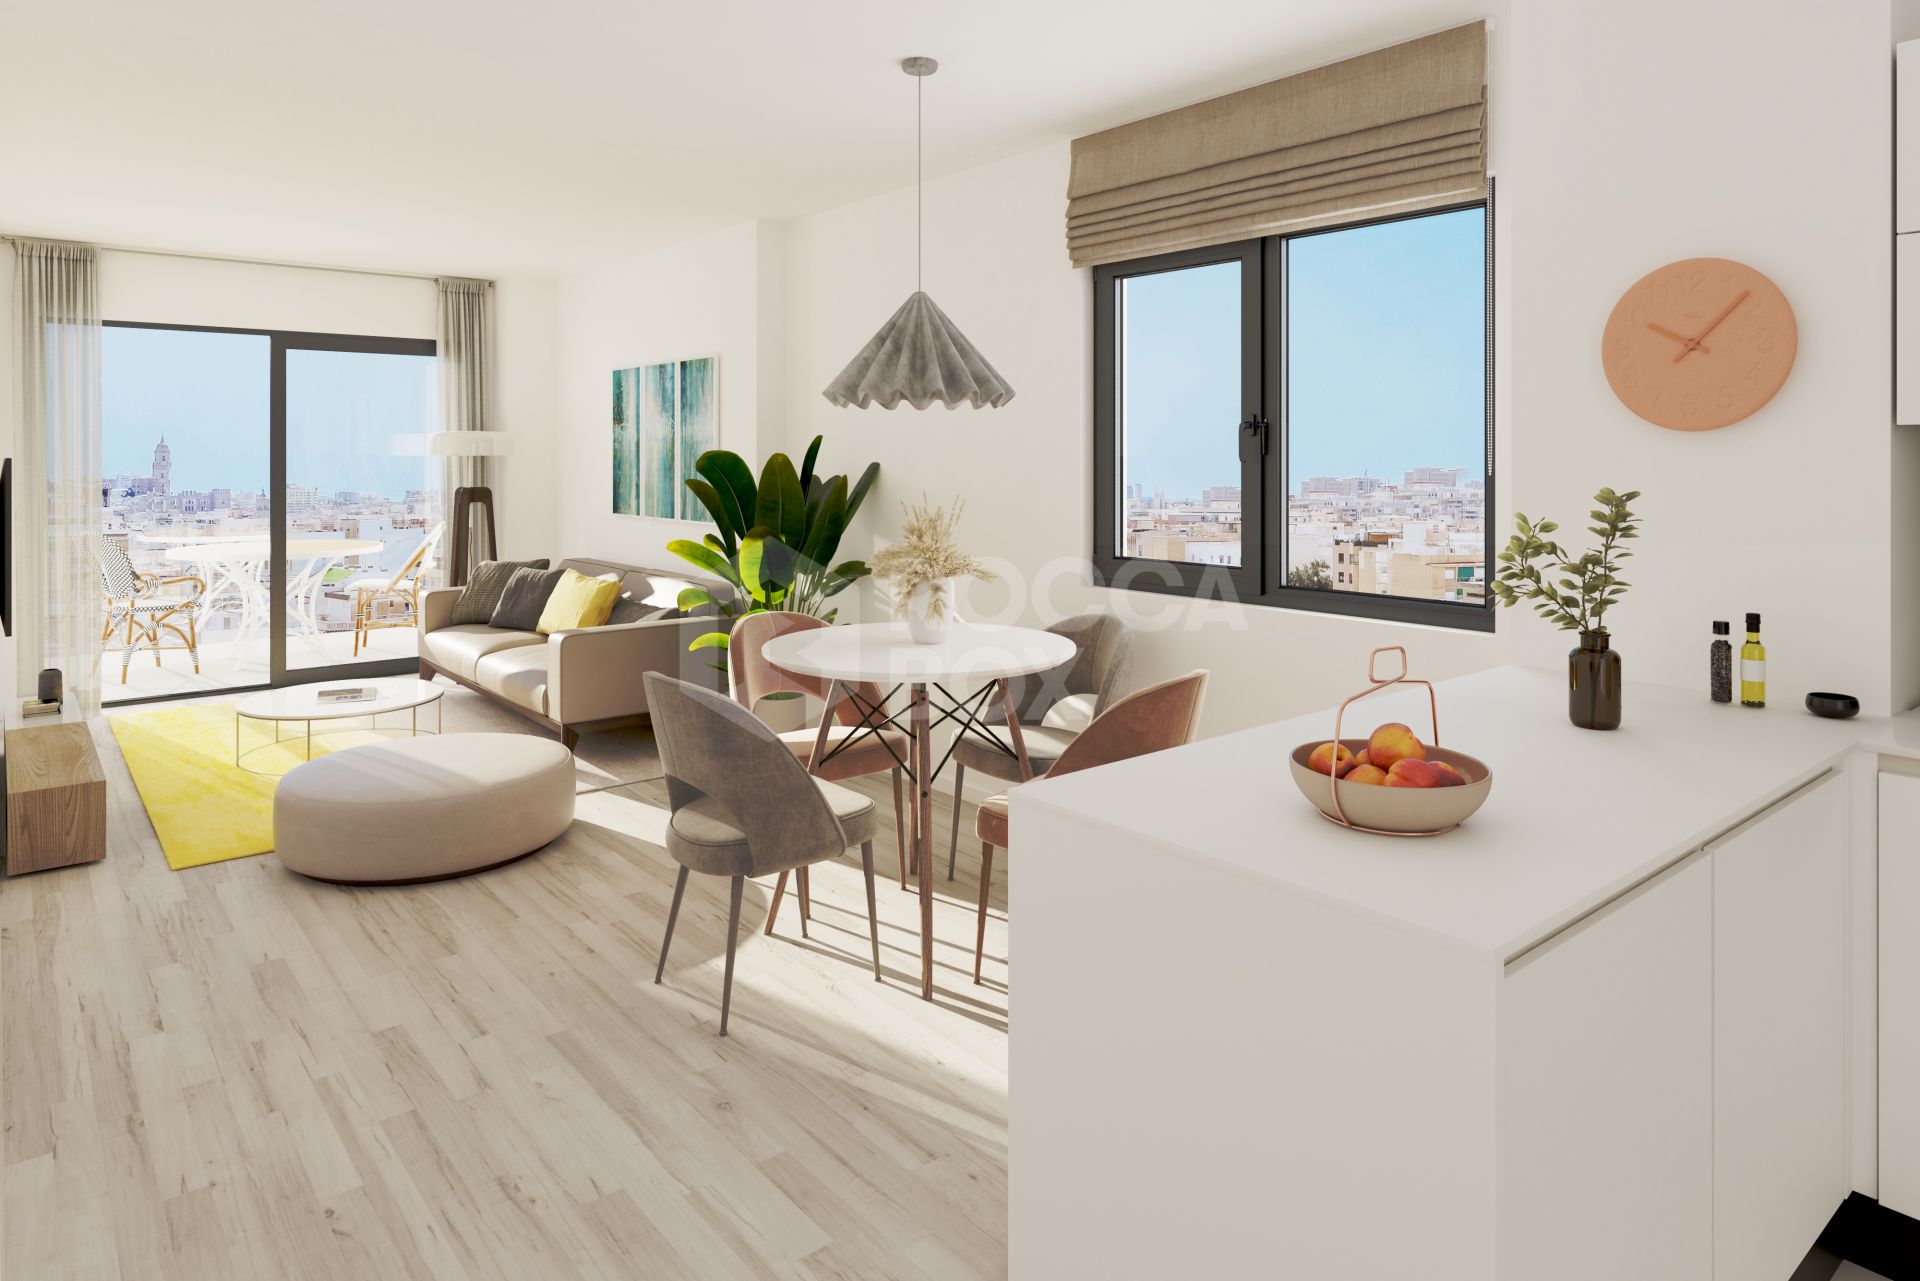 New luxurious Apartment in Malaga